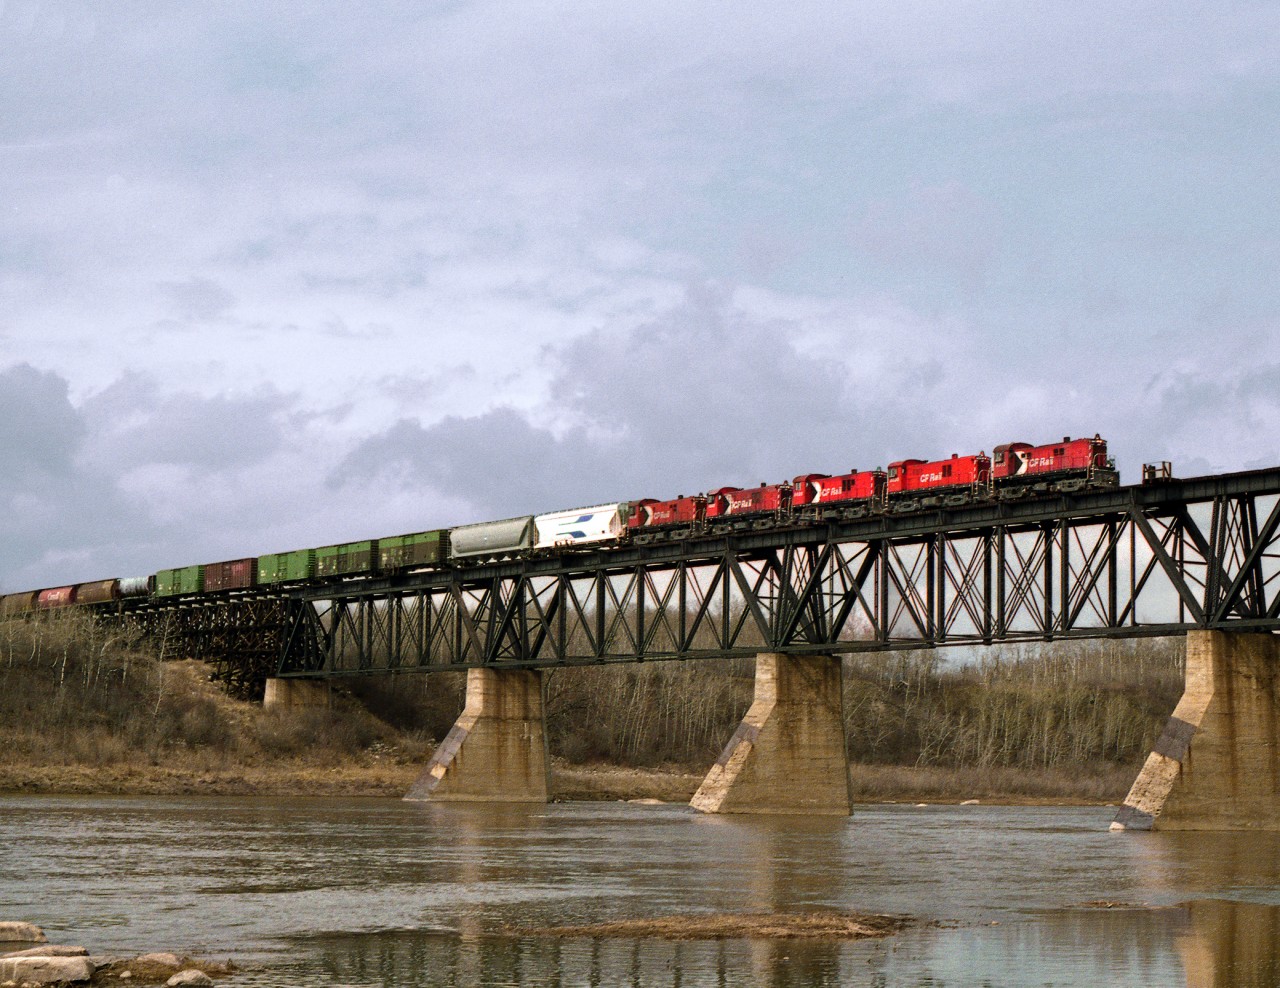 CP's daily Prince Albert to the North Main connection at Lanigan with 4 RS23's crosses the South Saskatchewan River on CN Running rights